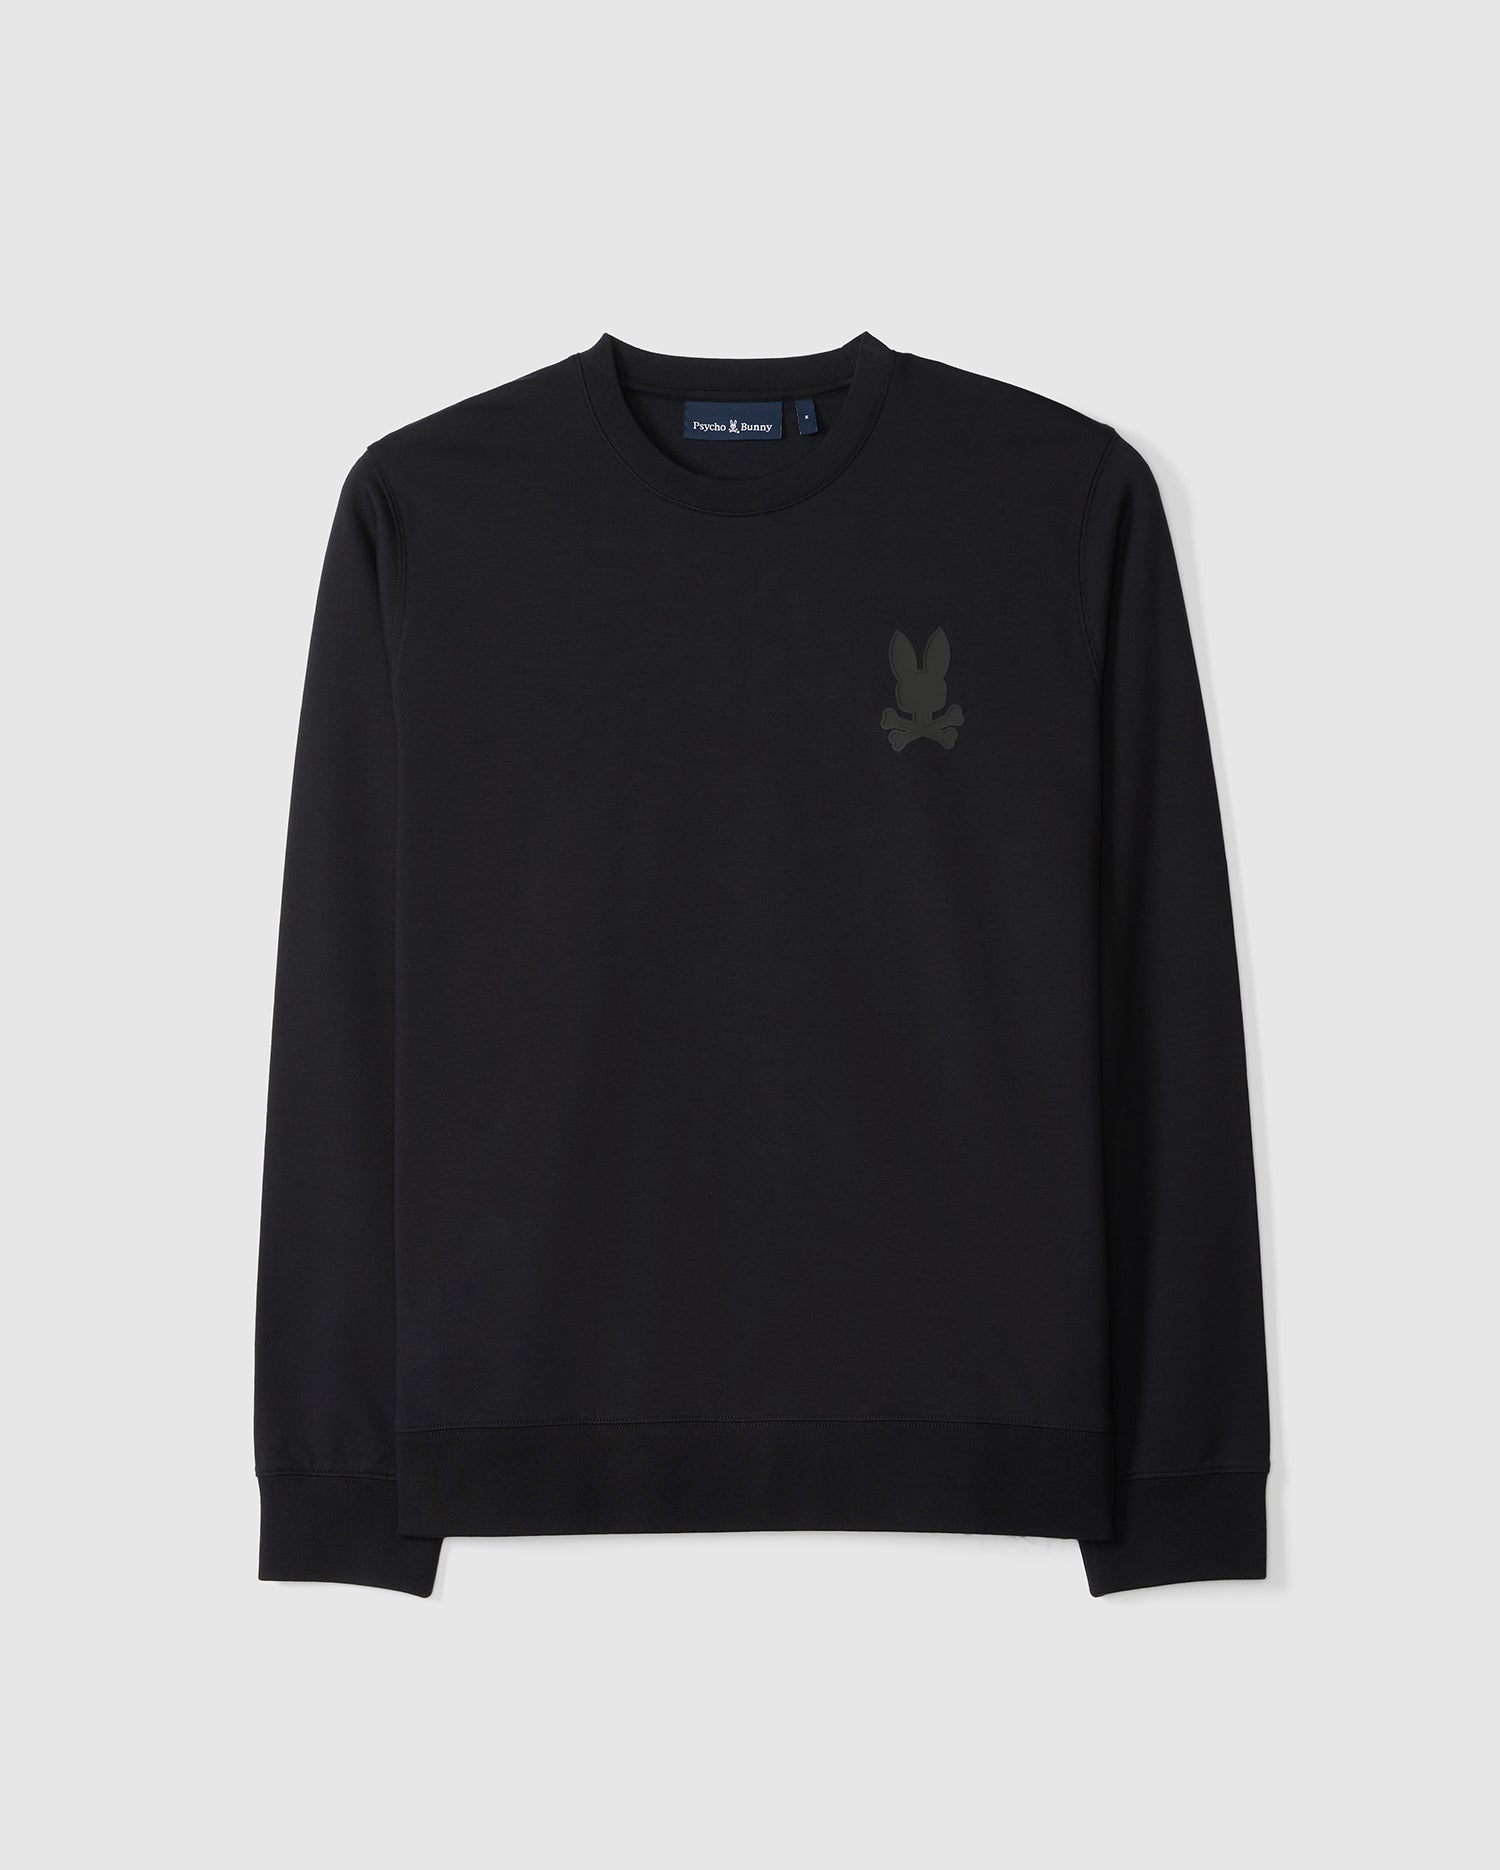 Flat front view of the mens houston french terry crewneck in black featuring a tonal psycho bunny logo